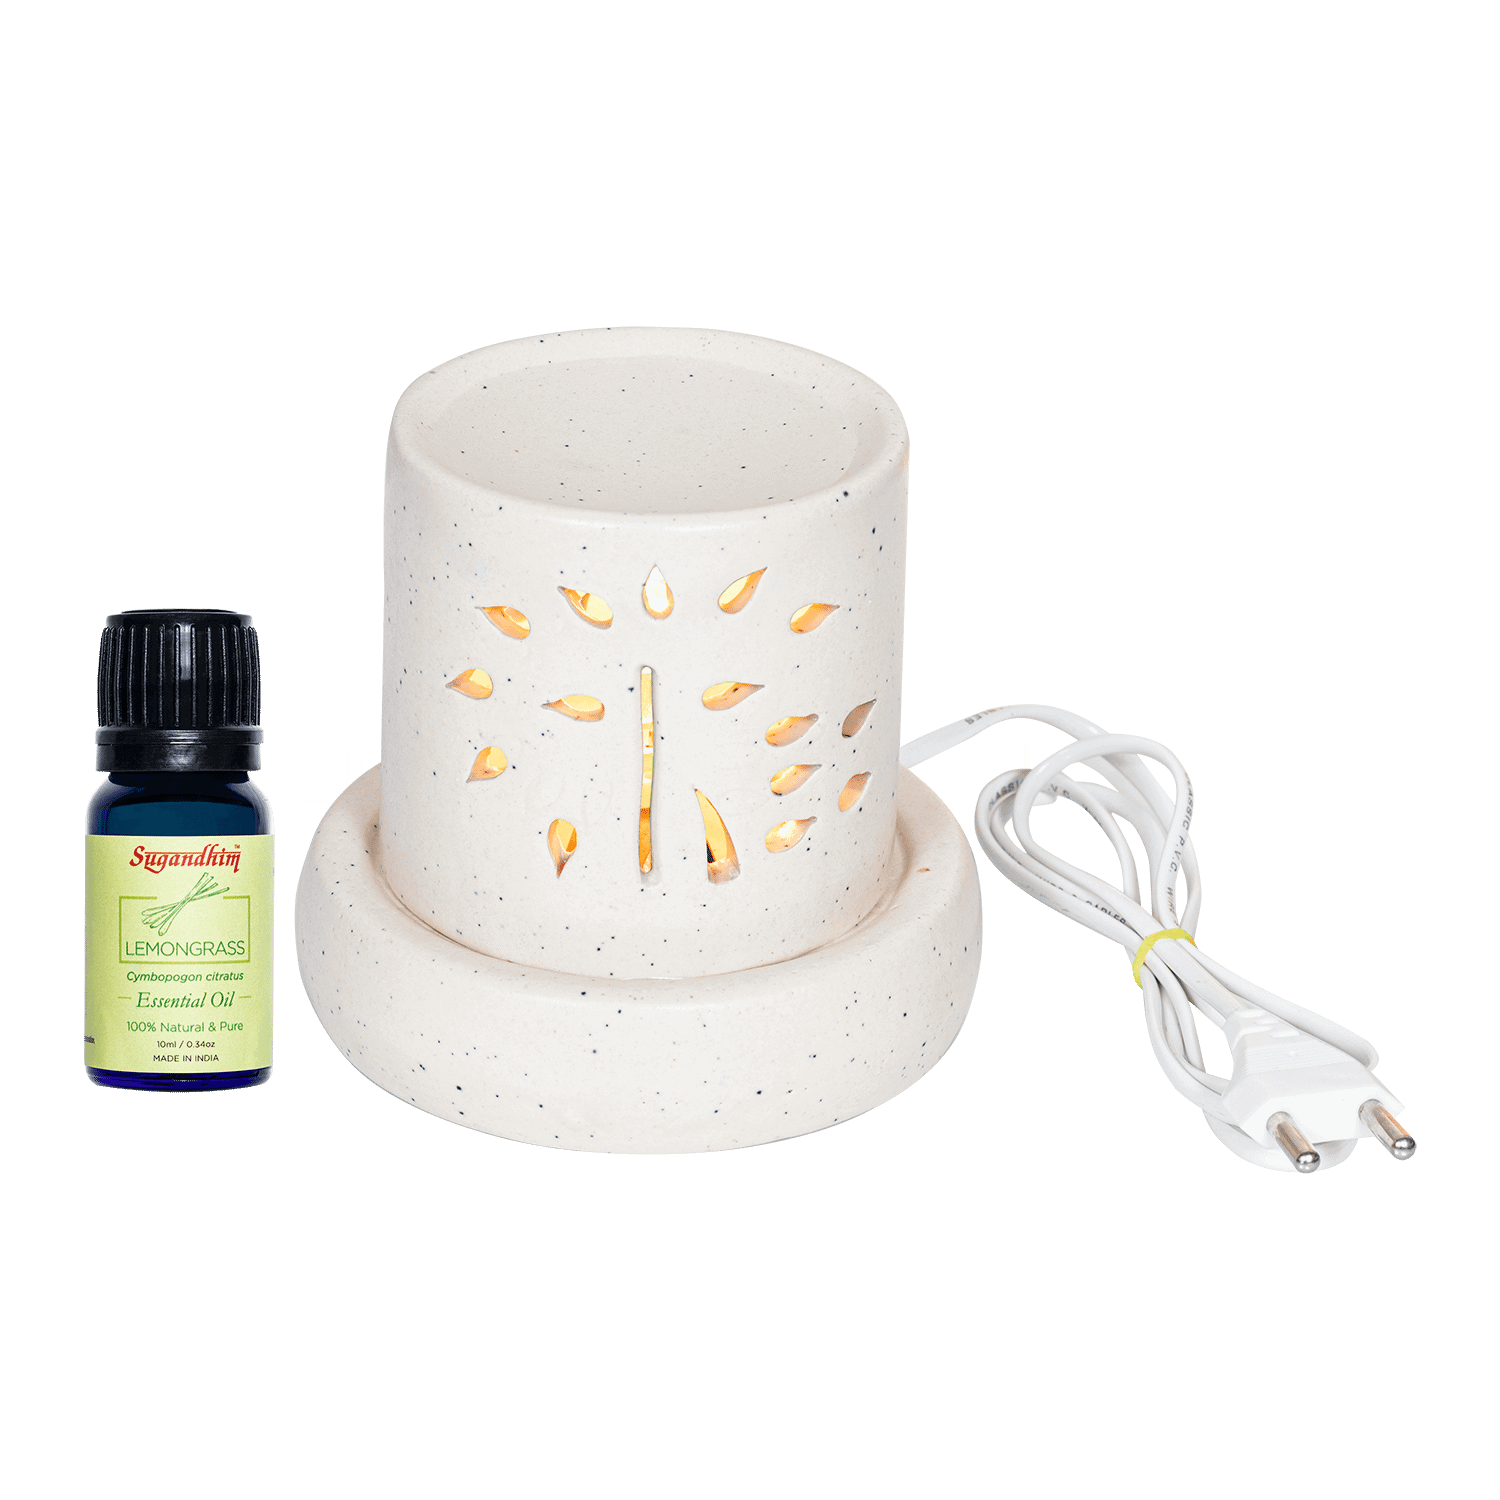 Electric Diffuser with 10ml Lemongrass Essential Oil - Cream Colour With Black Dots